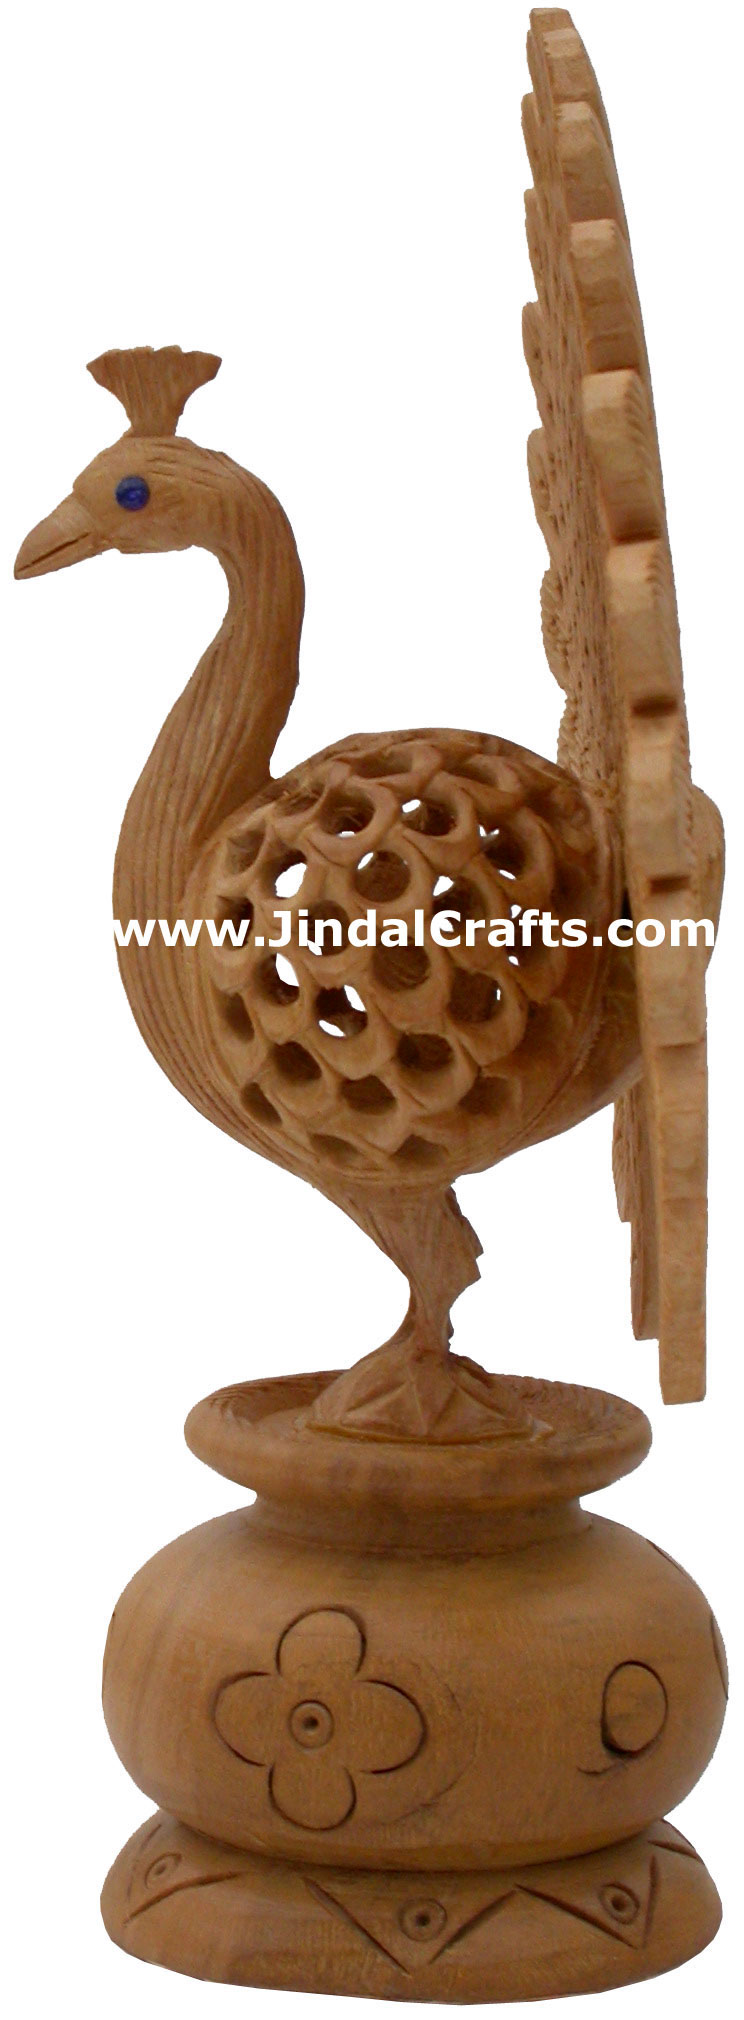 Wooden Peacock - Hand Carved Indian Carving Art